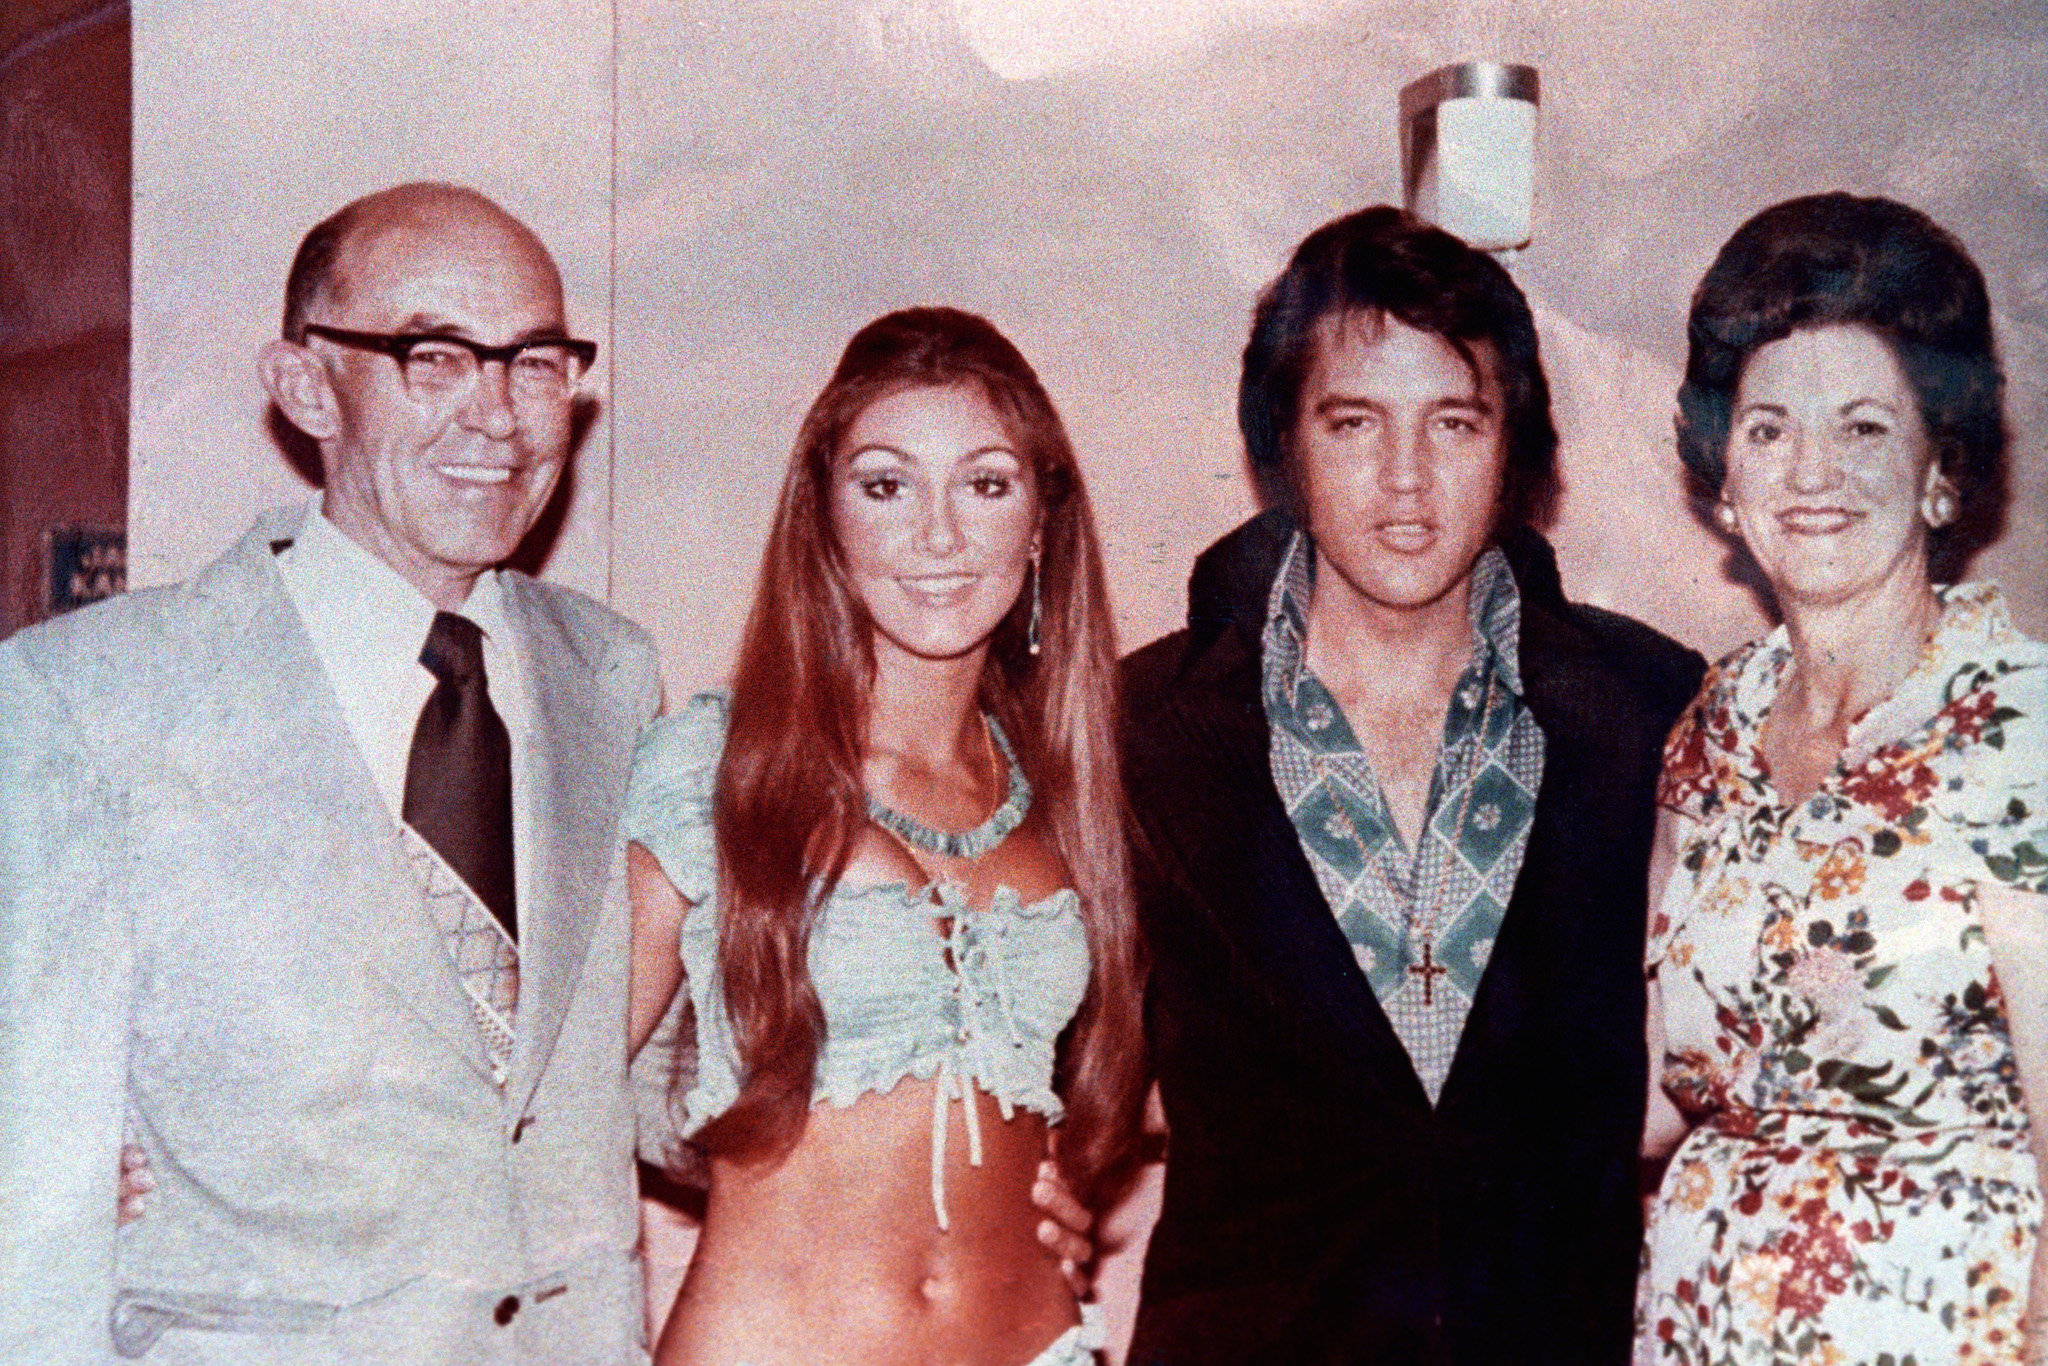 Elvis Presley with former girlfriend Linda Thompson and family